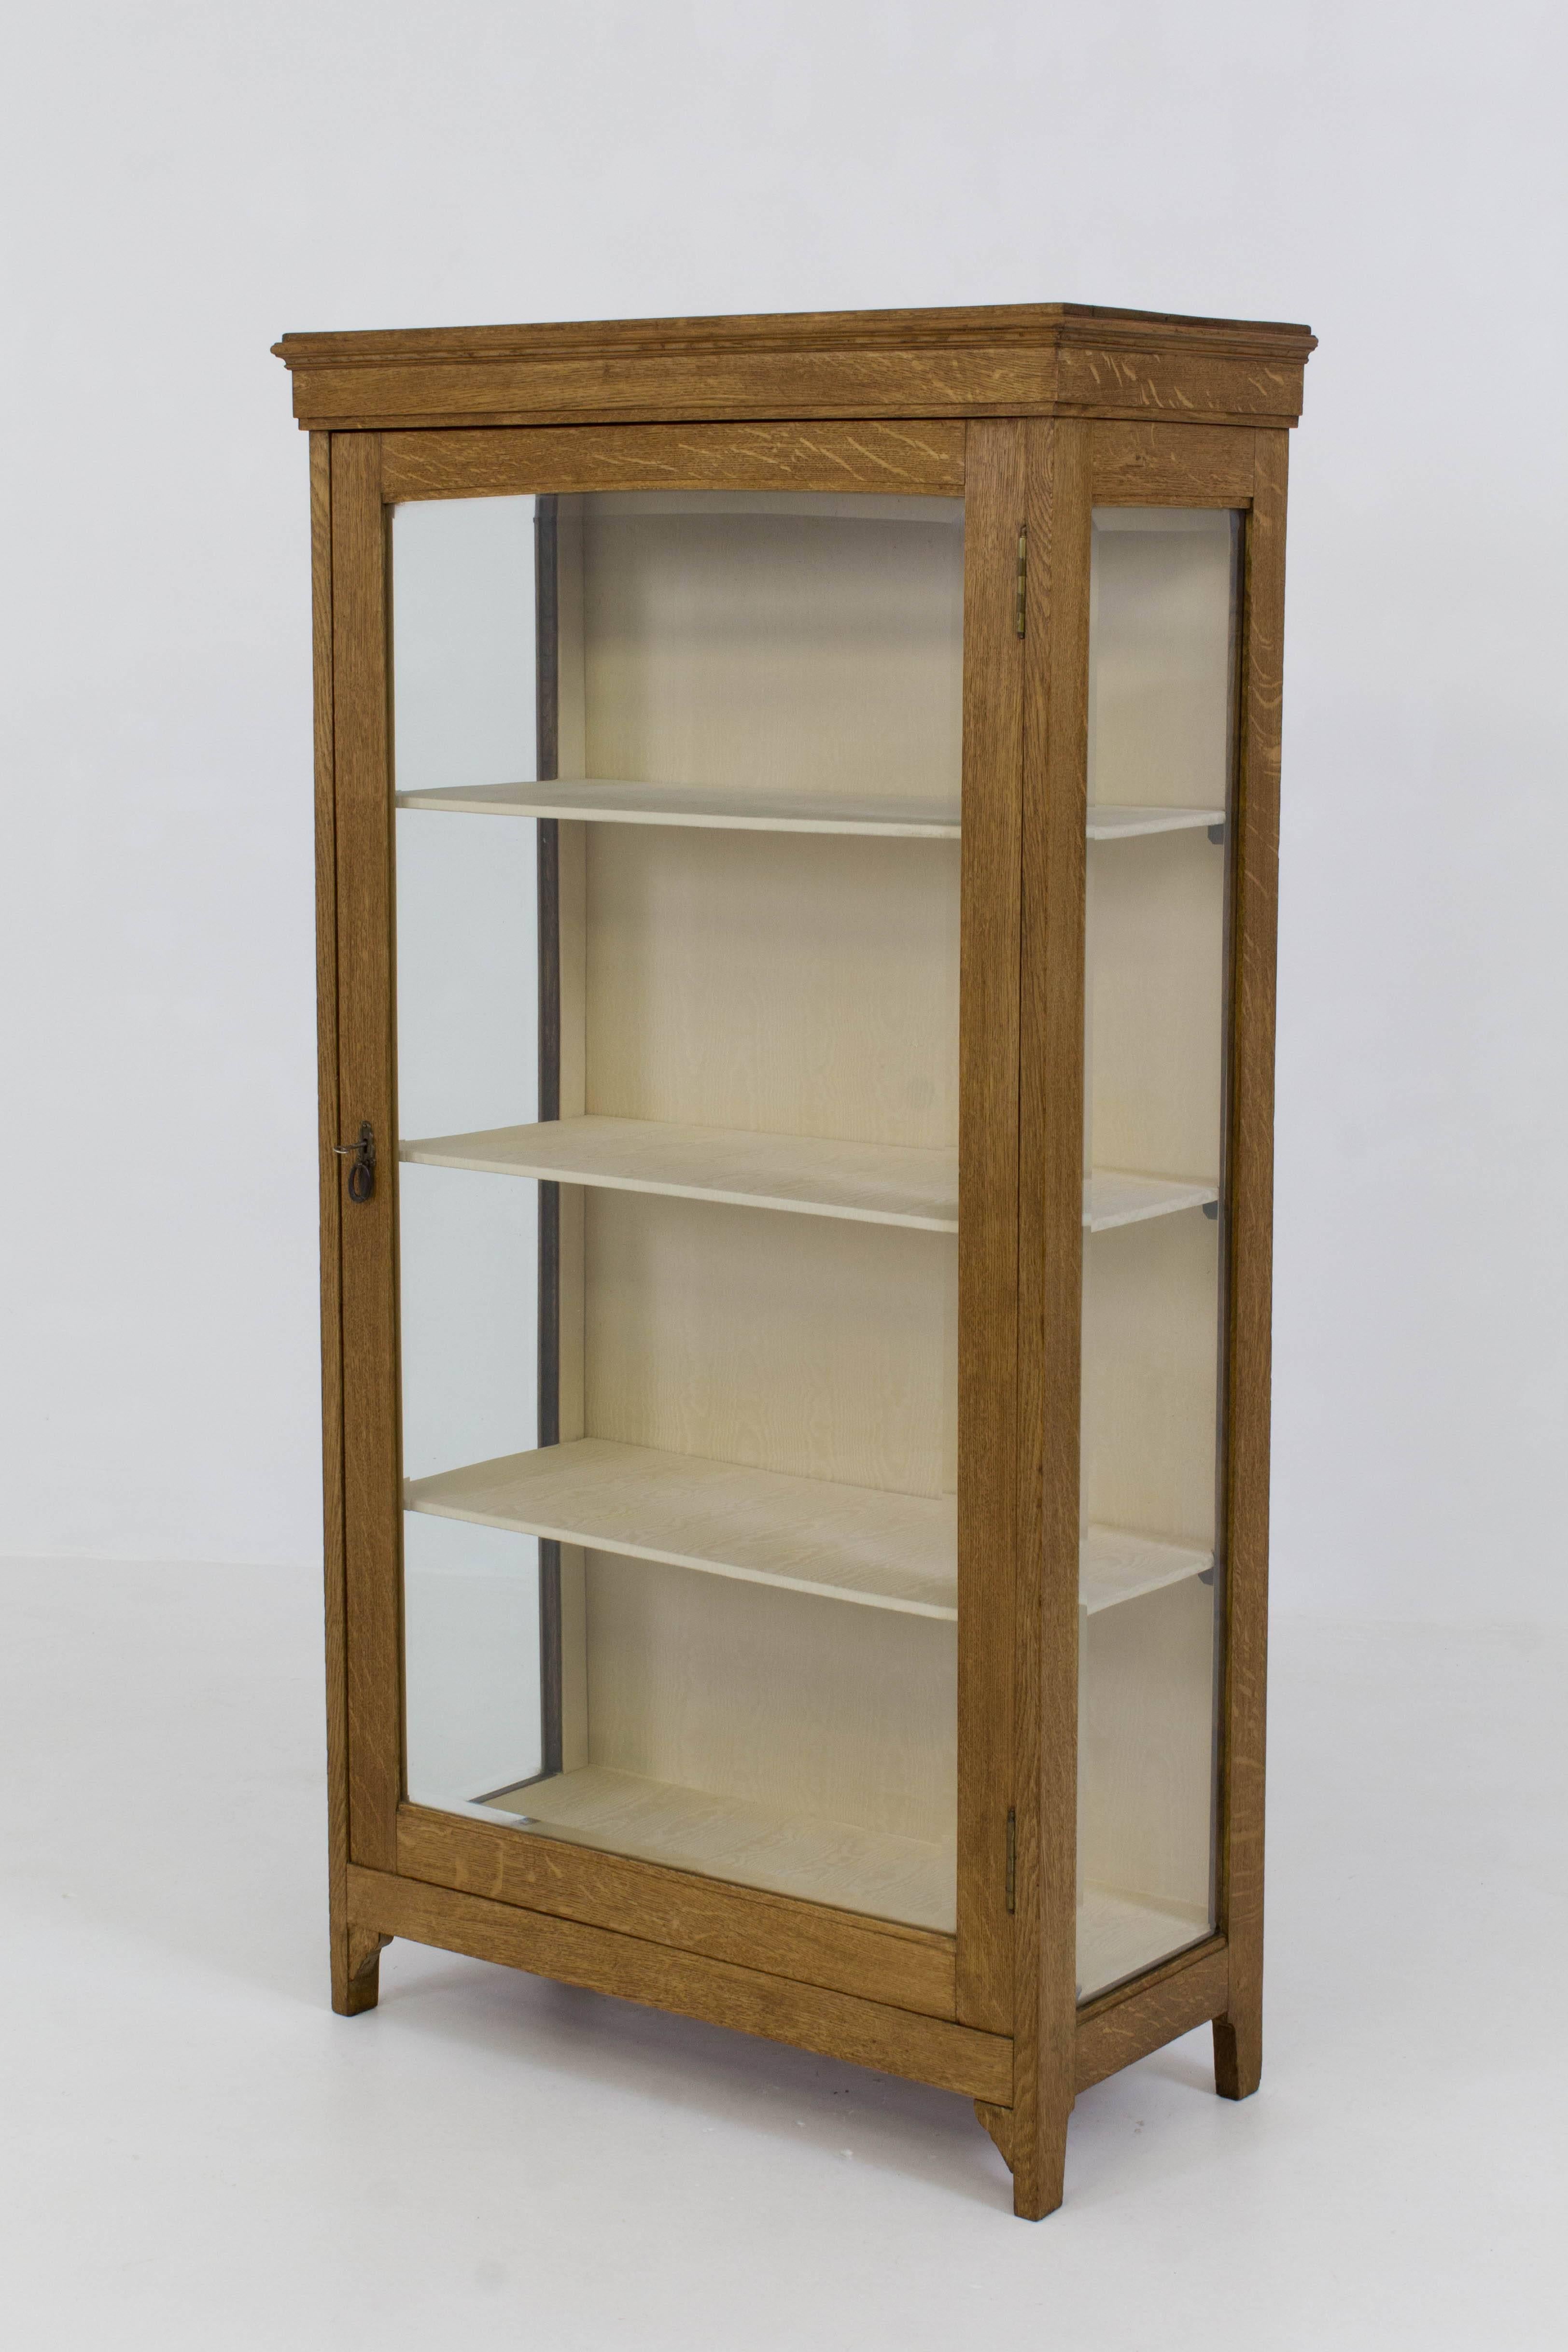 Stylish Dutch Art Nouveau vitrine with beveled glass 1900s.
Solid oak with three shelves wrapped in fabric.
In good original condition with minor wear consistent with age and use,
preserving a beautiful patina.